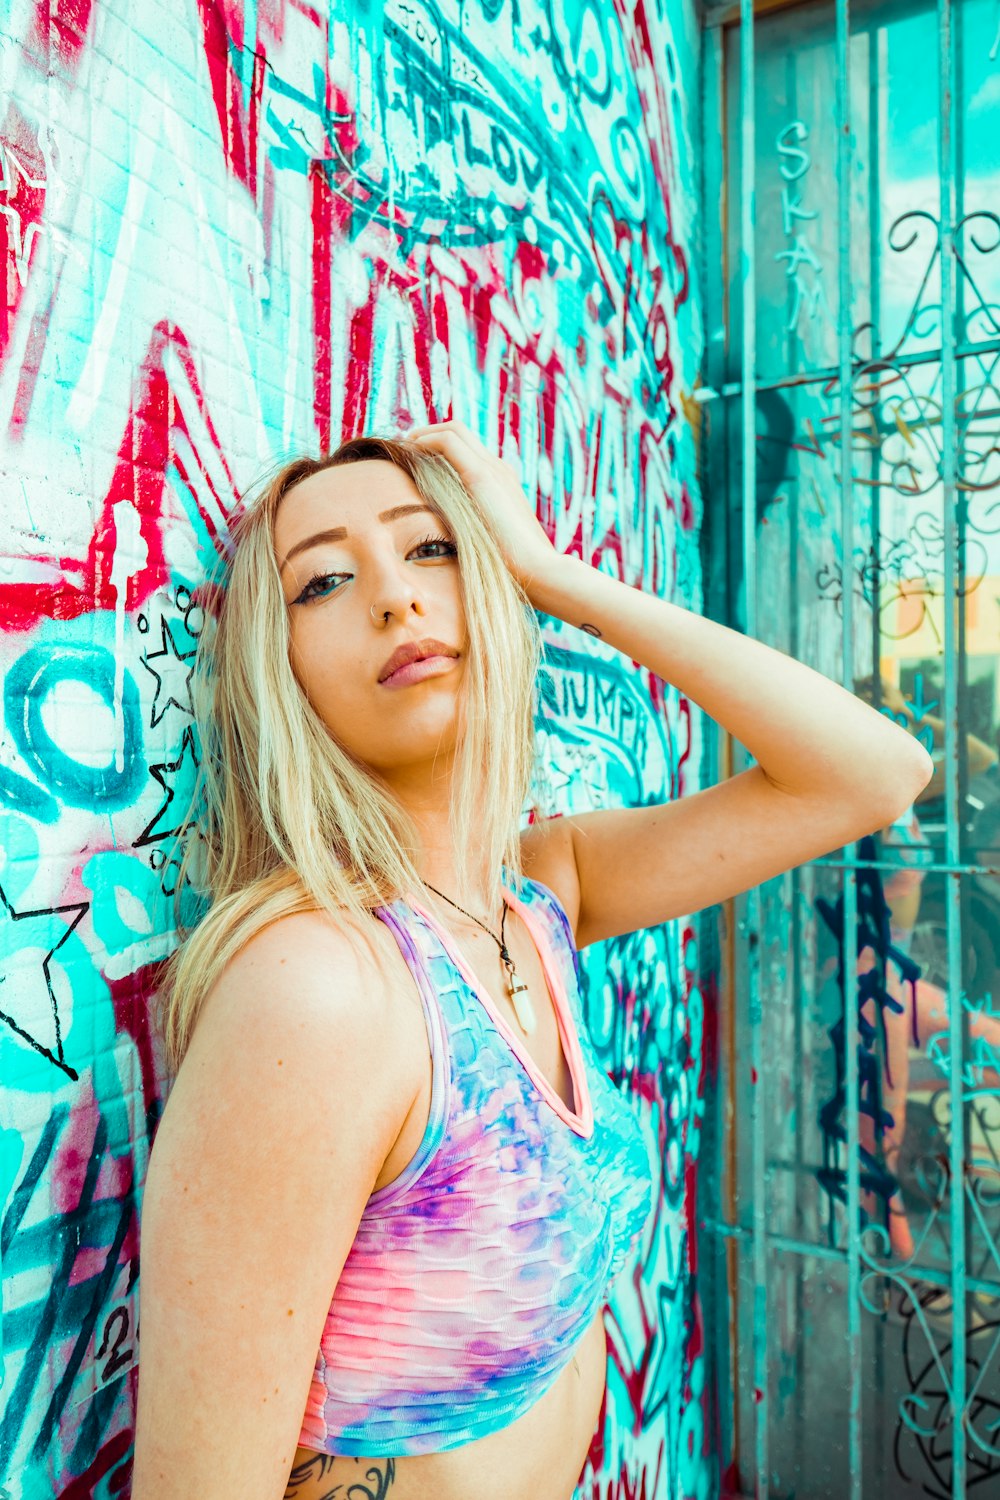 woman in pink and blue tank top leaning on wall with graffiti